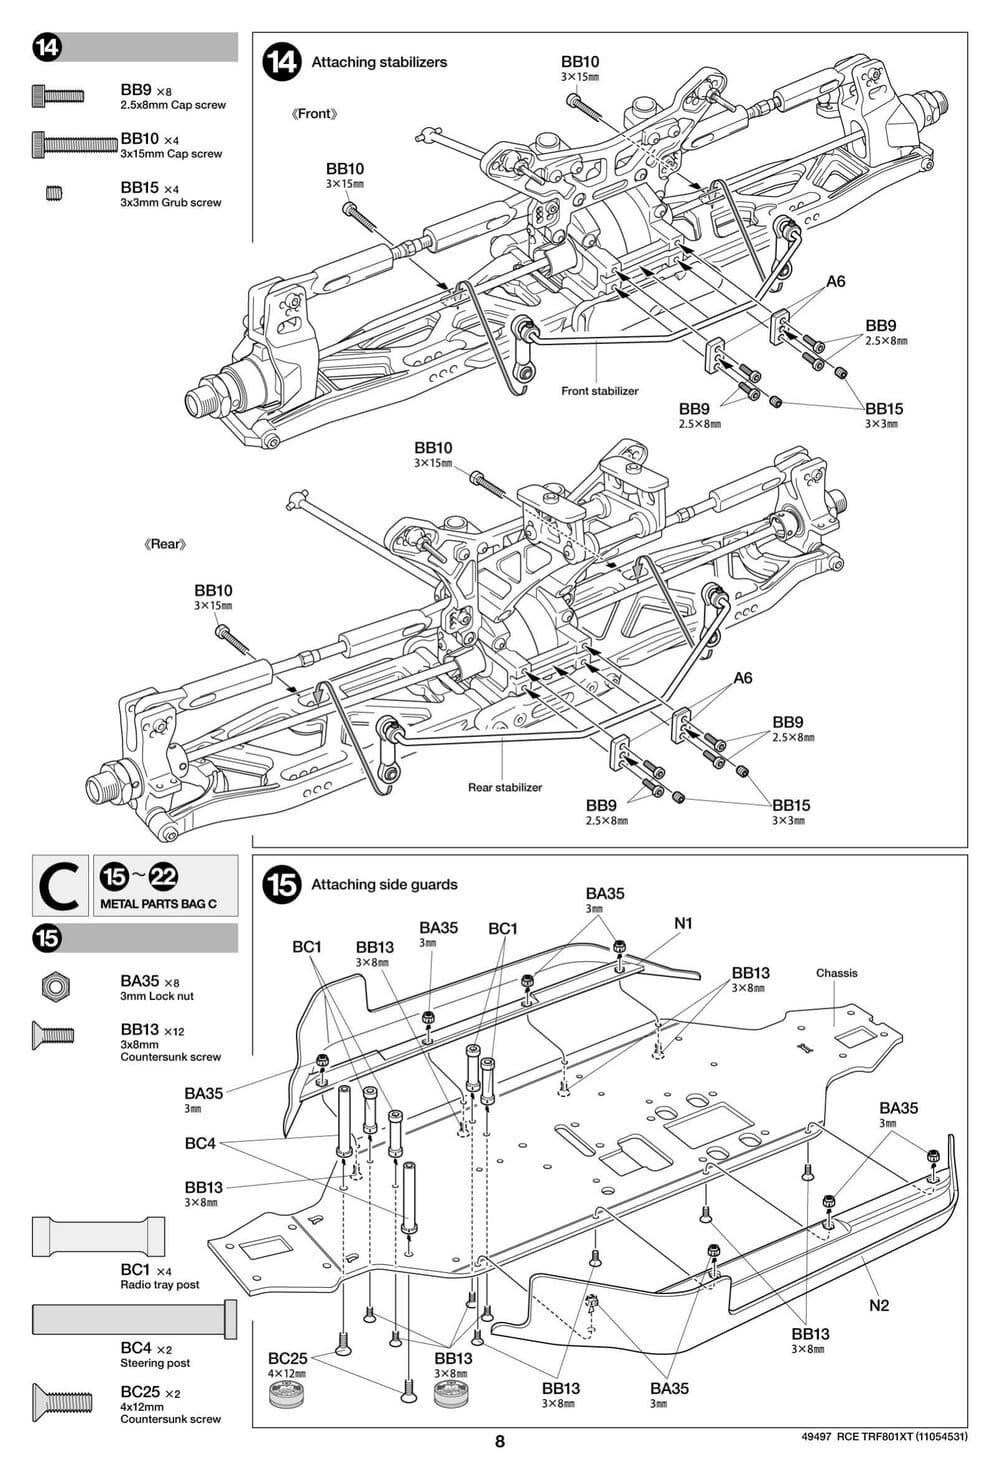 Tamiya - TRF801Xt Performance Package Version Chassis - Manual - Page 8